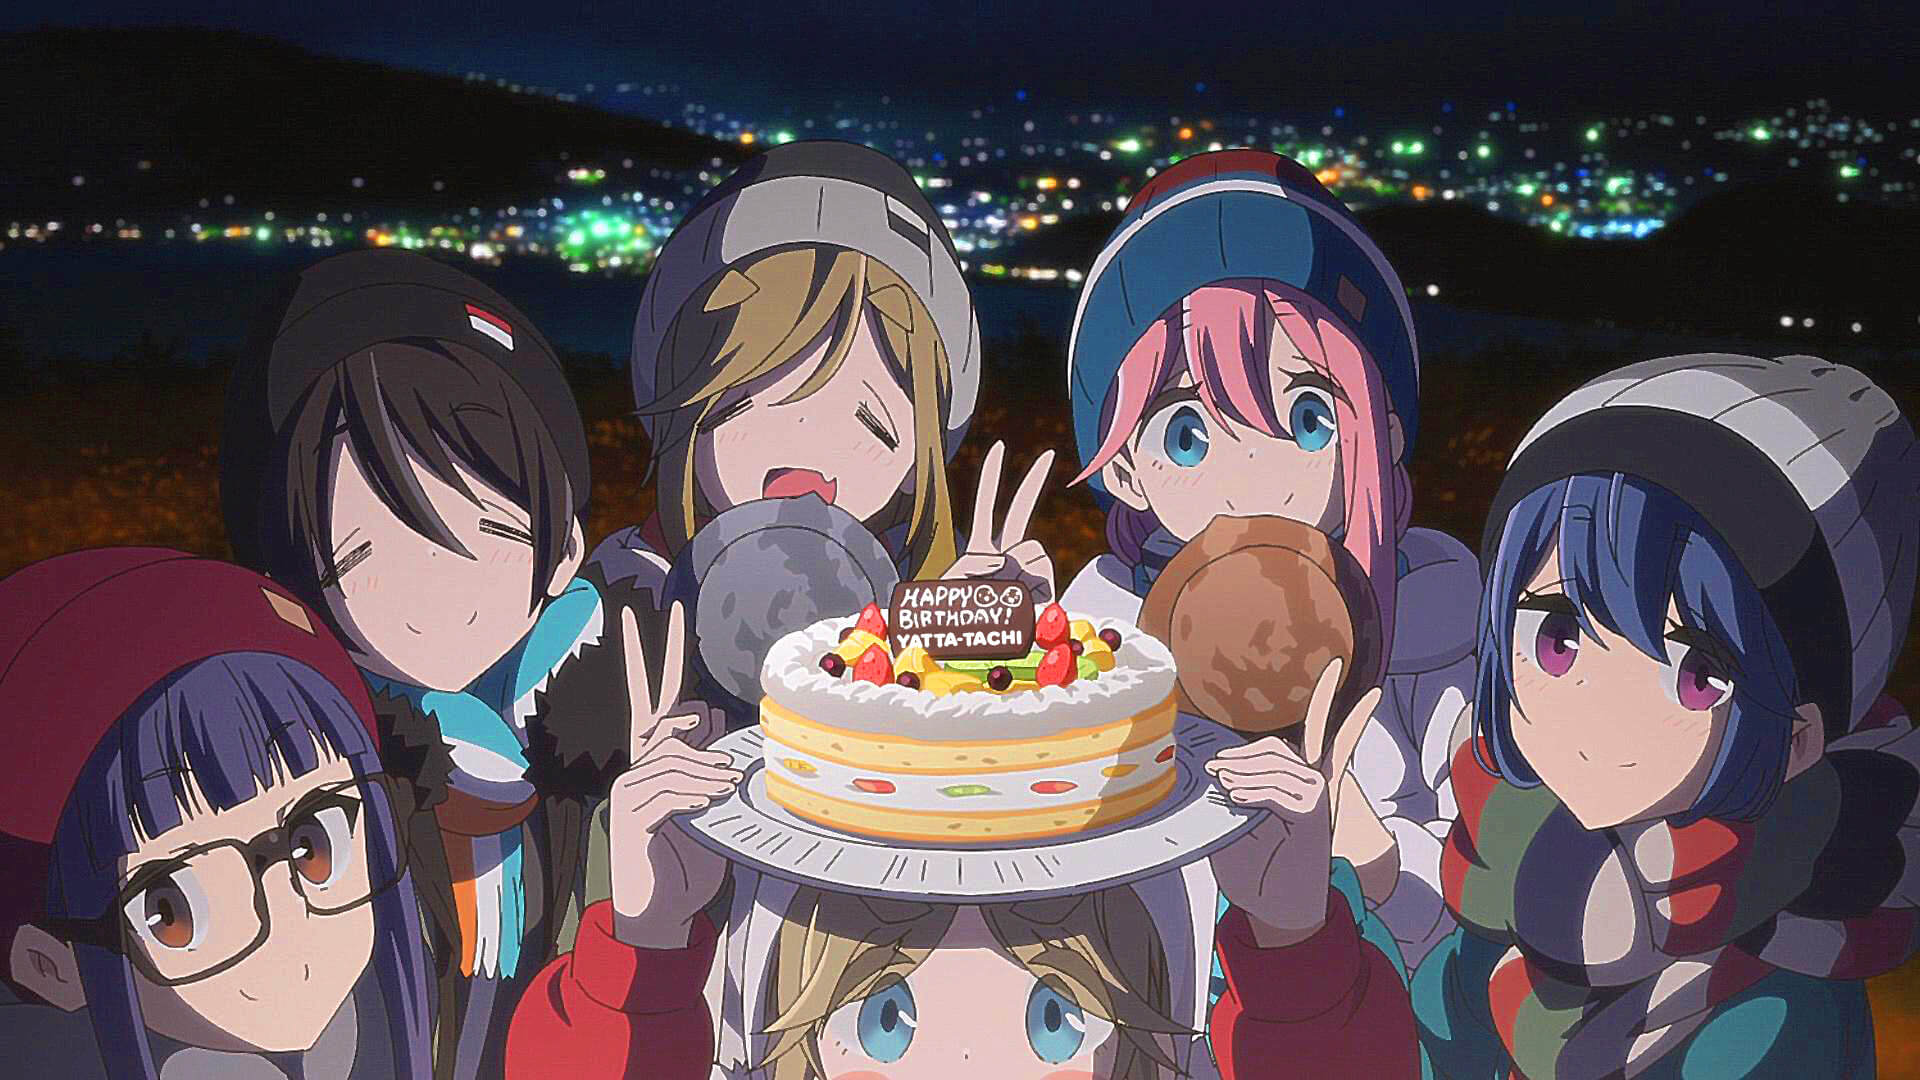 Girls from Laid-Back Camp posing together for a picture and holding up a birthday cake that says "Happy Birthday, Yatta-Tachi!"